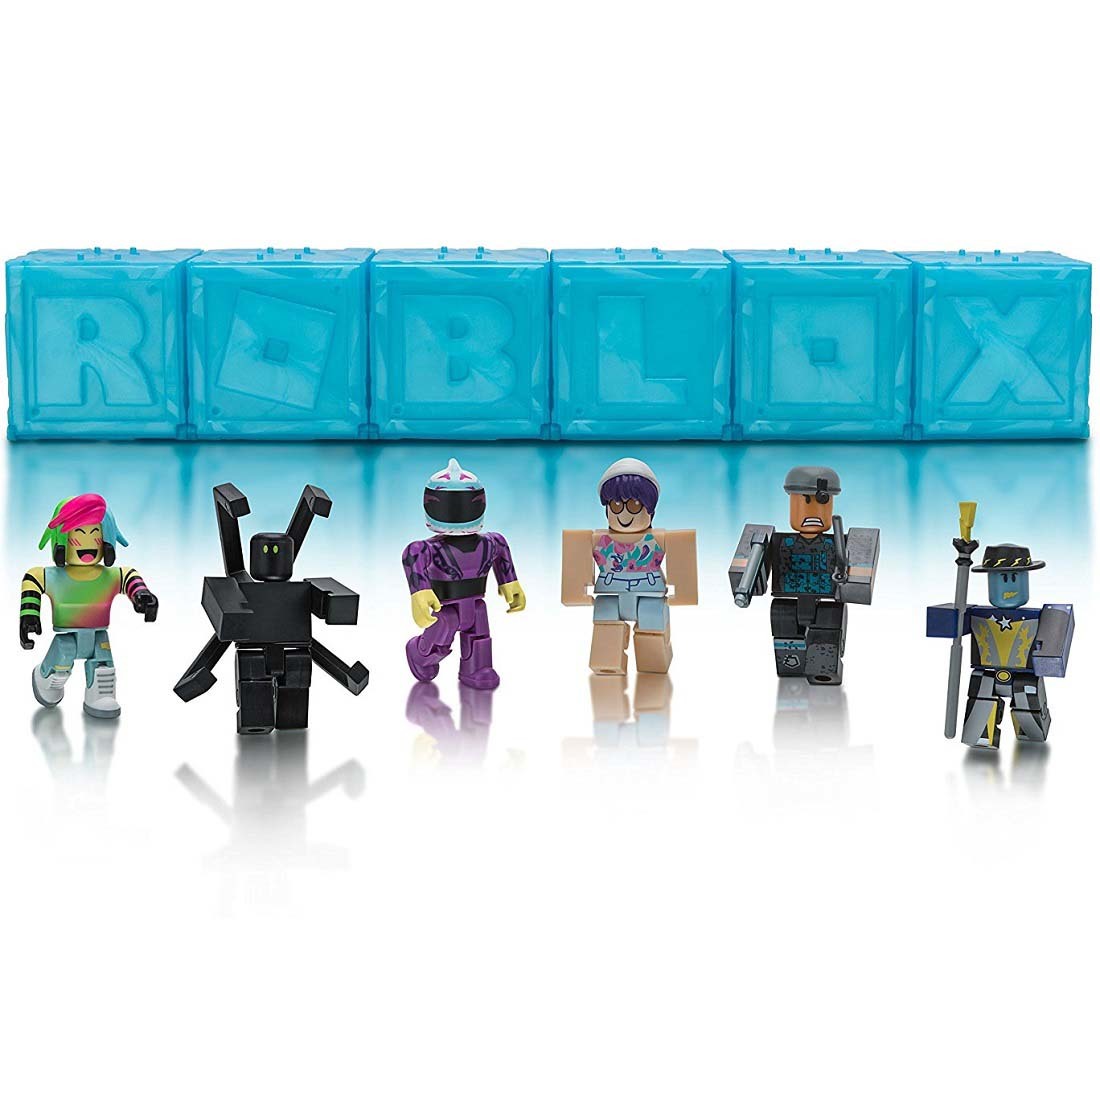 Roblox Toys Series 3 - roblox mystery figure series 1 best roblox figures